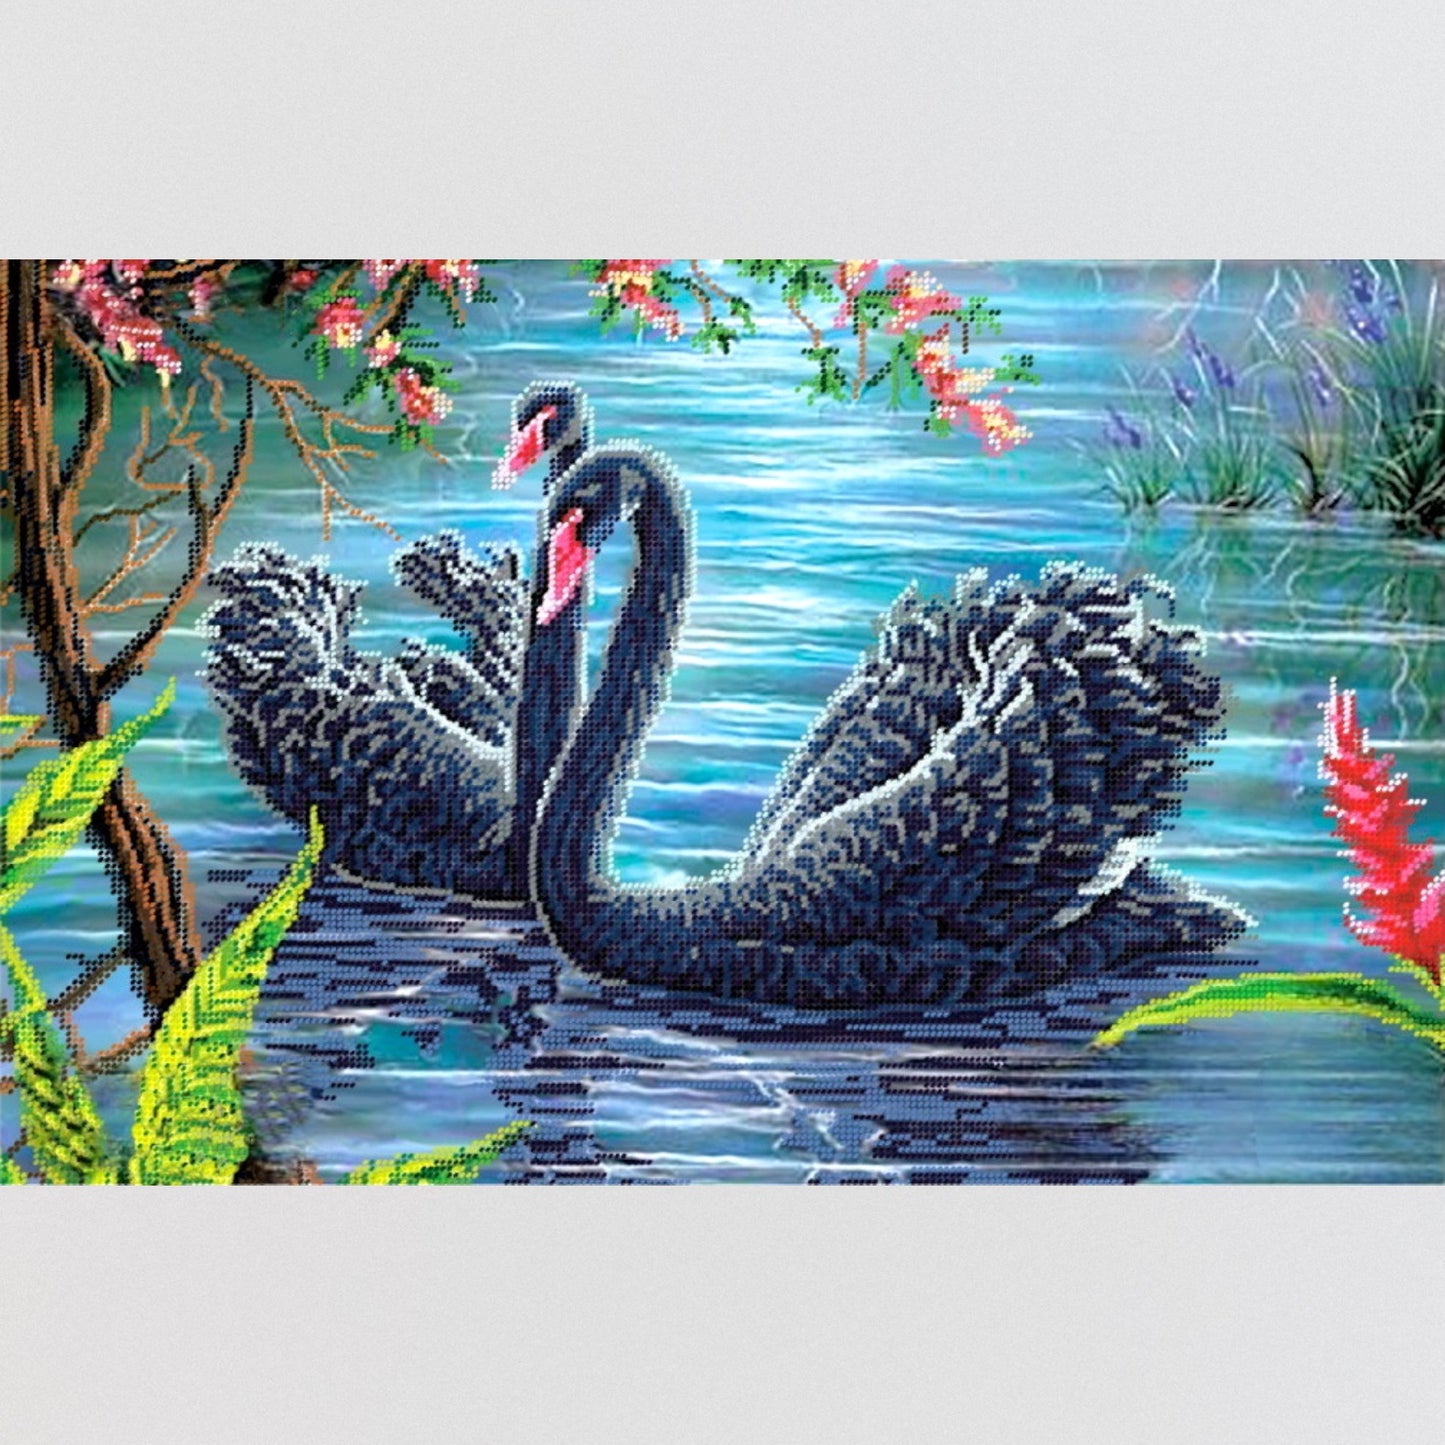 DIY Bead embroidery kit "Black Swans". Size: 18.5-15.7in (47-30сm) - VadymShop